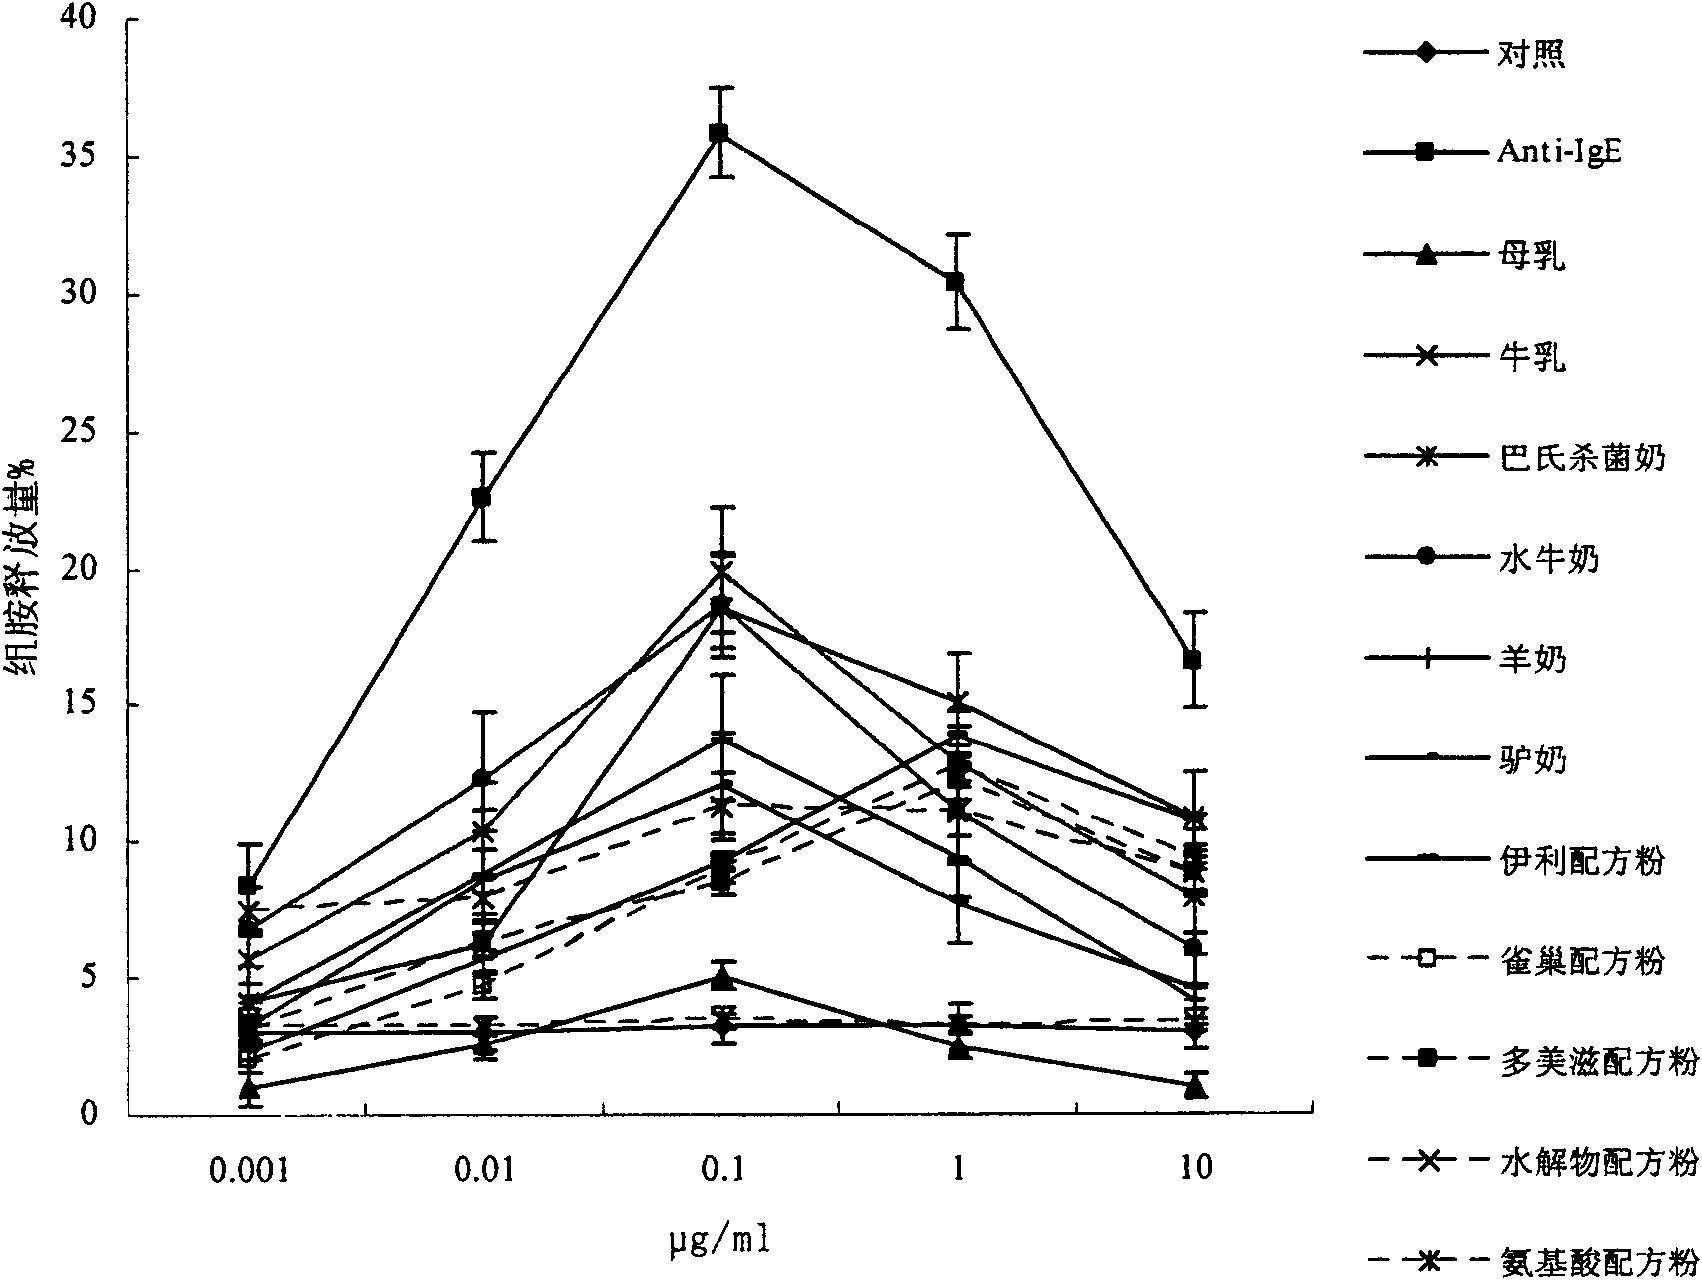 Method for detecting sensitivity of suspected allergen in milk and dairy products